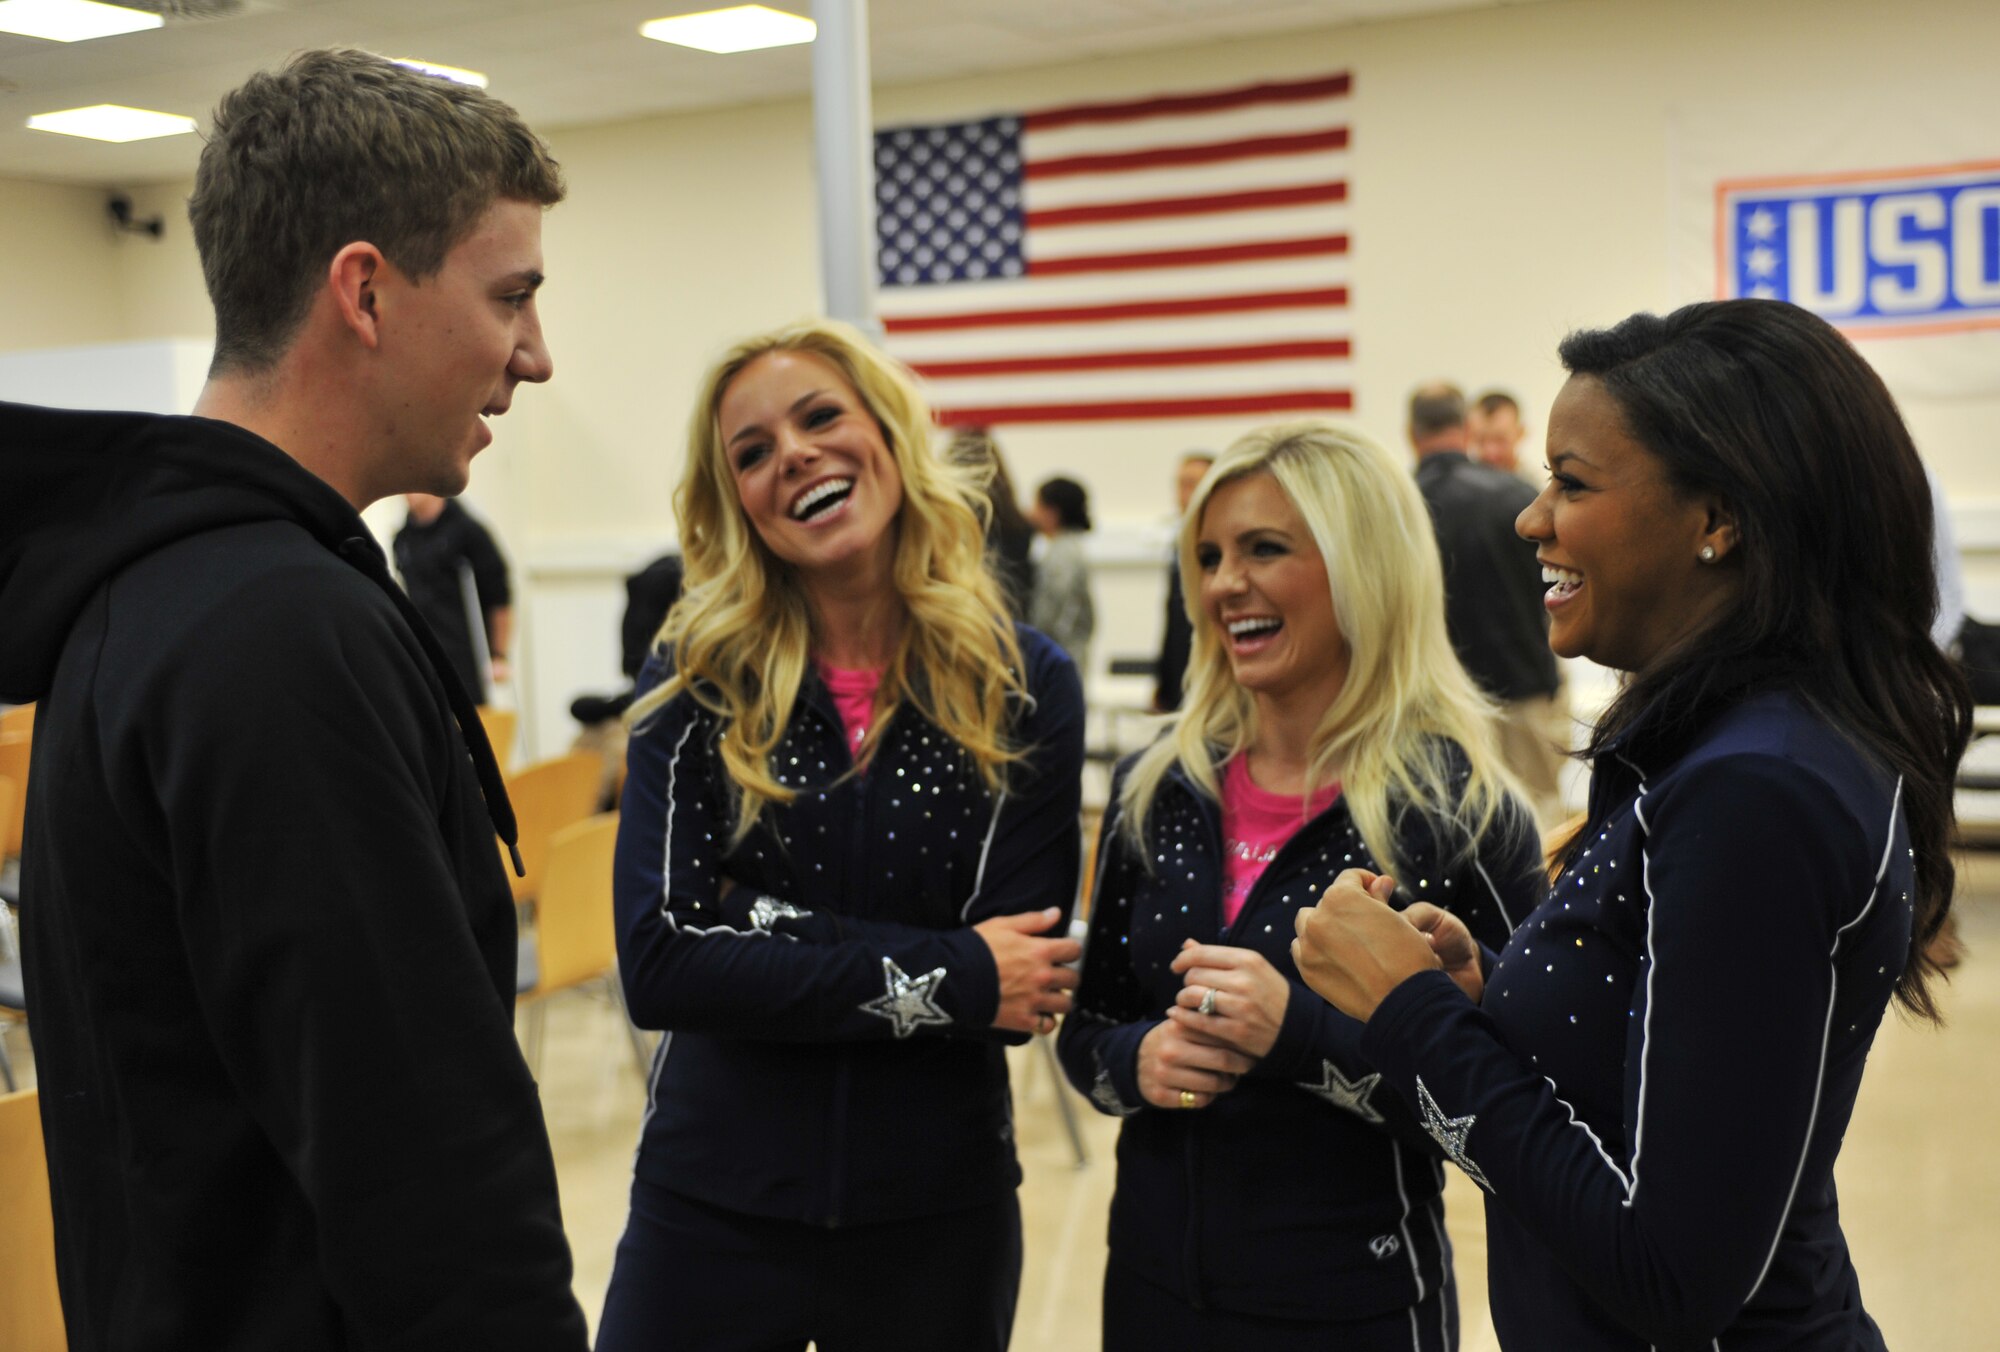 Navy Operations Specialist 2nd Class James Westrich meets with Dallas Cowboys Cheerleaders at the Contingency Aeromedical Staging Facility on Ramstein Air Base, Germany, April 20, 2012. During the United Services Organization and Armed Forces Entertainment tour, the ninth Vice Chairman of the Joint Chiefs of Staff, joined with a cast of entertainers, visited with troops stationed overseas. The tour consisted of live performances, and the group visited different organizations throughout the Kaiserslautern Military Community. (U.S. Air Force photo/Airman 1st Class Caitlin 